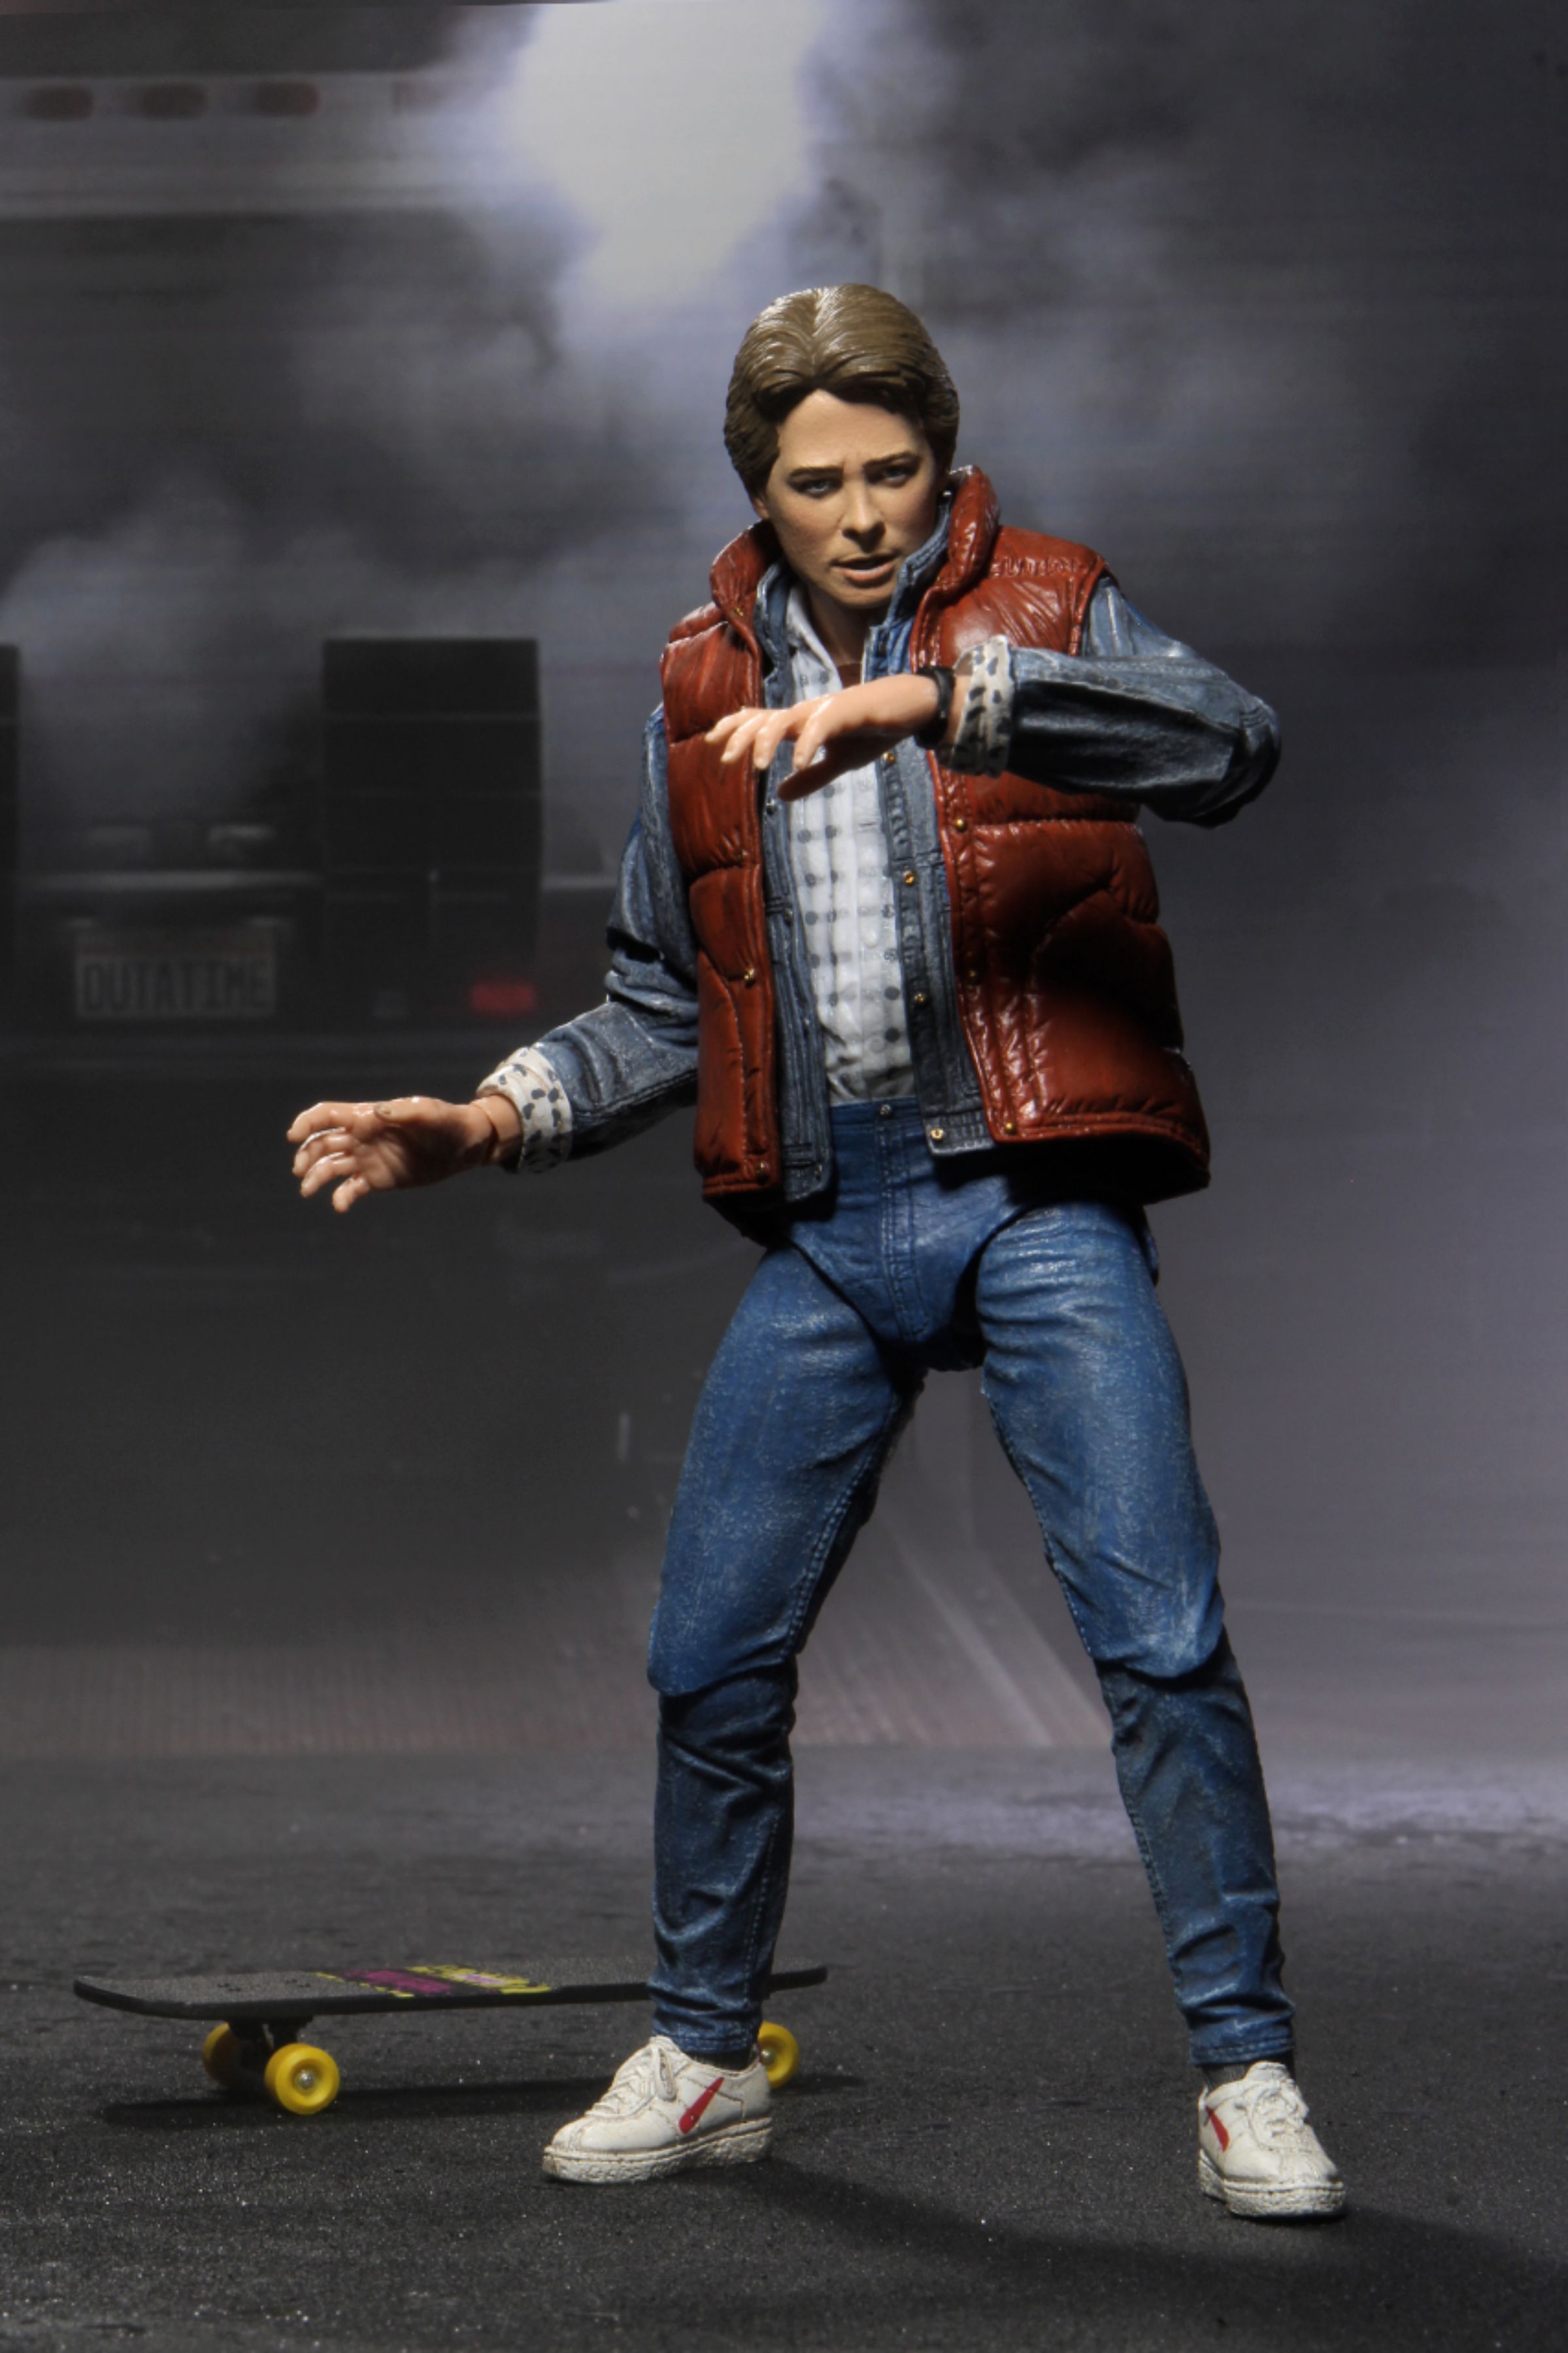 53615 for sale online NECA Marty McFly 7 inch Action Figure 